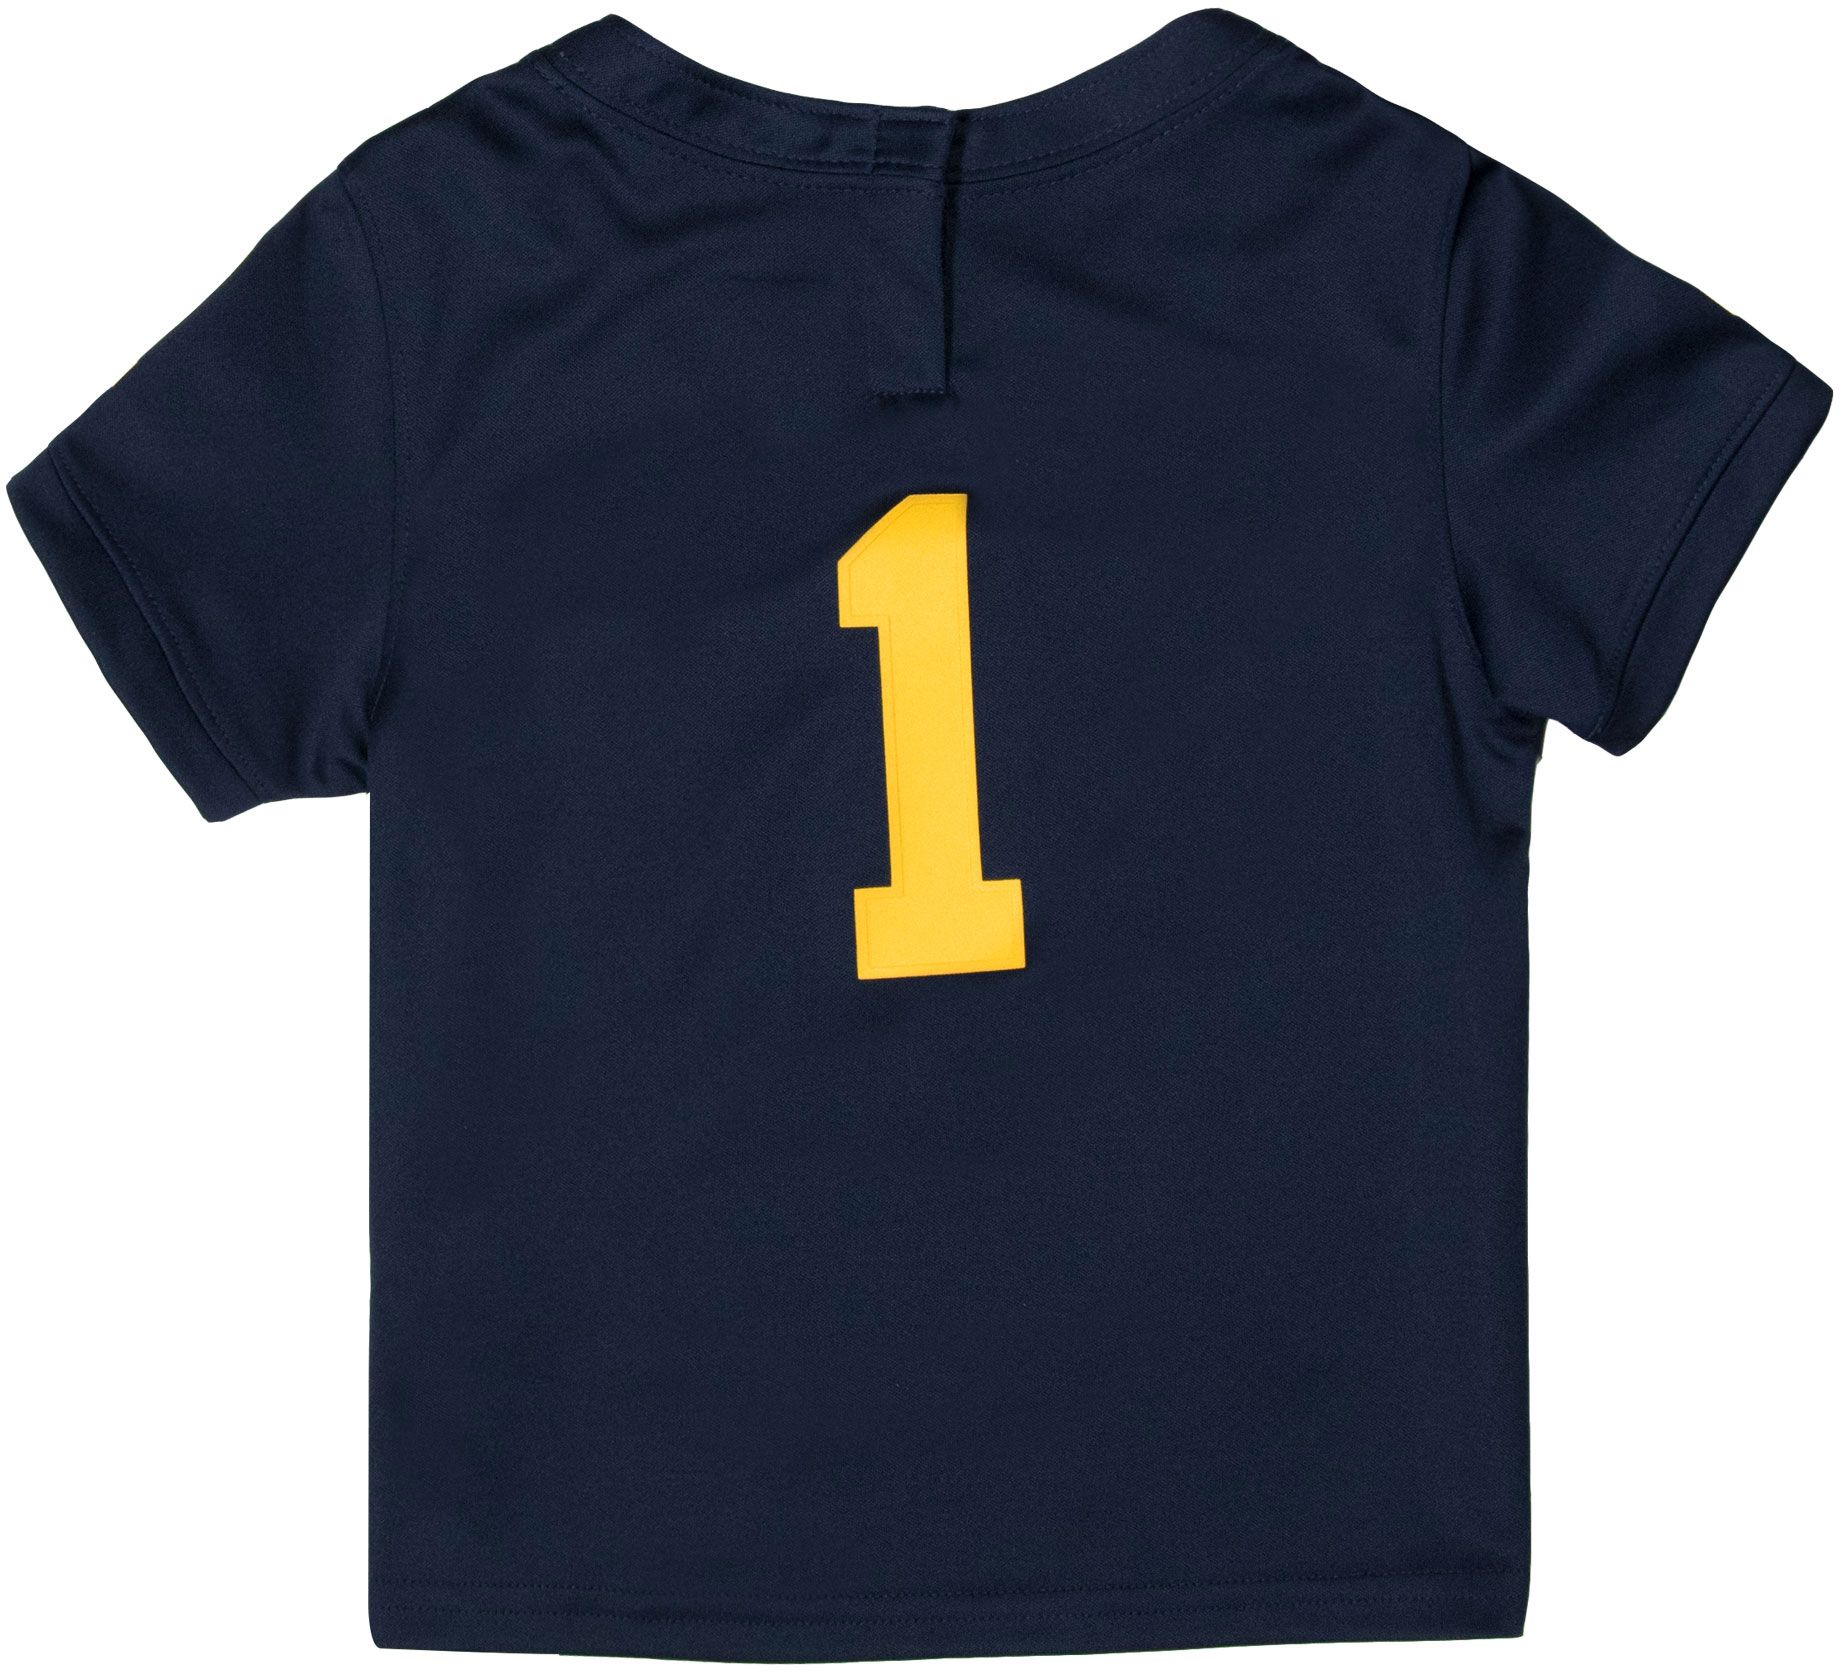 12-18 month michigan wolverines baby apparel jersey